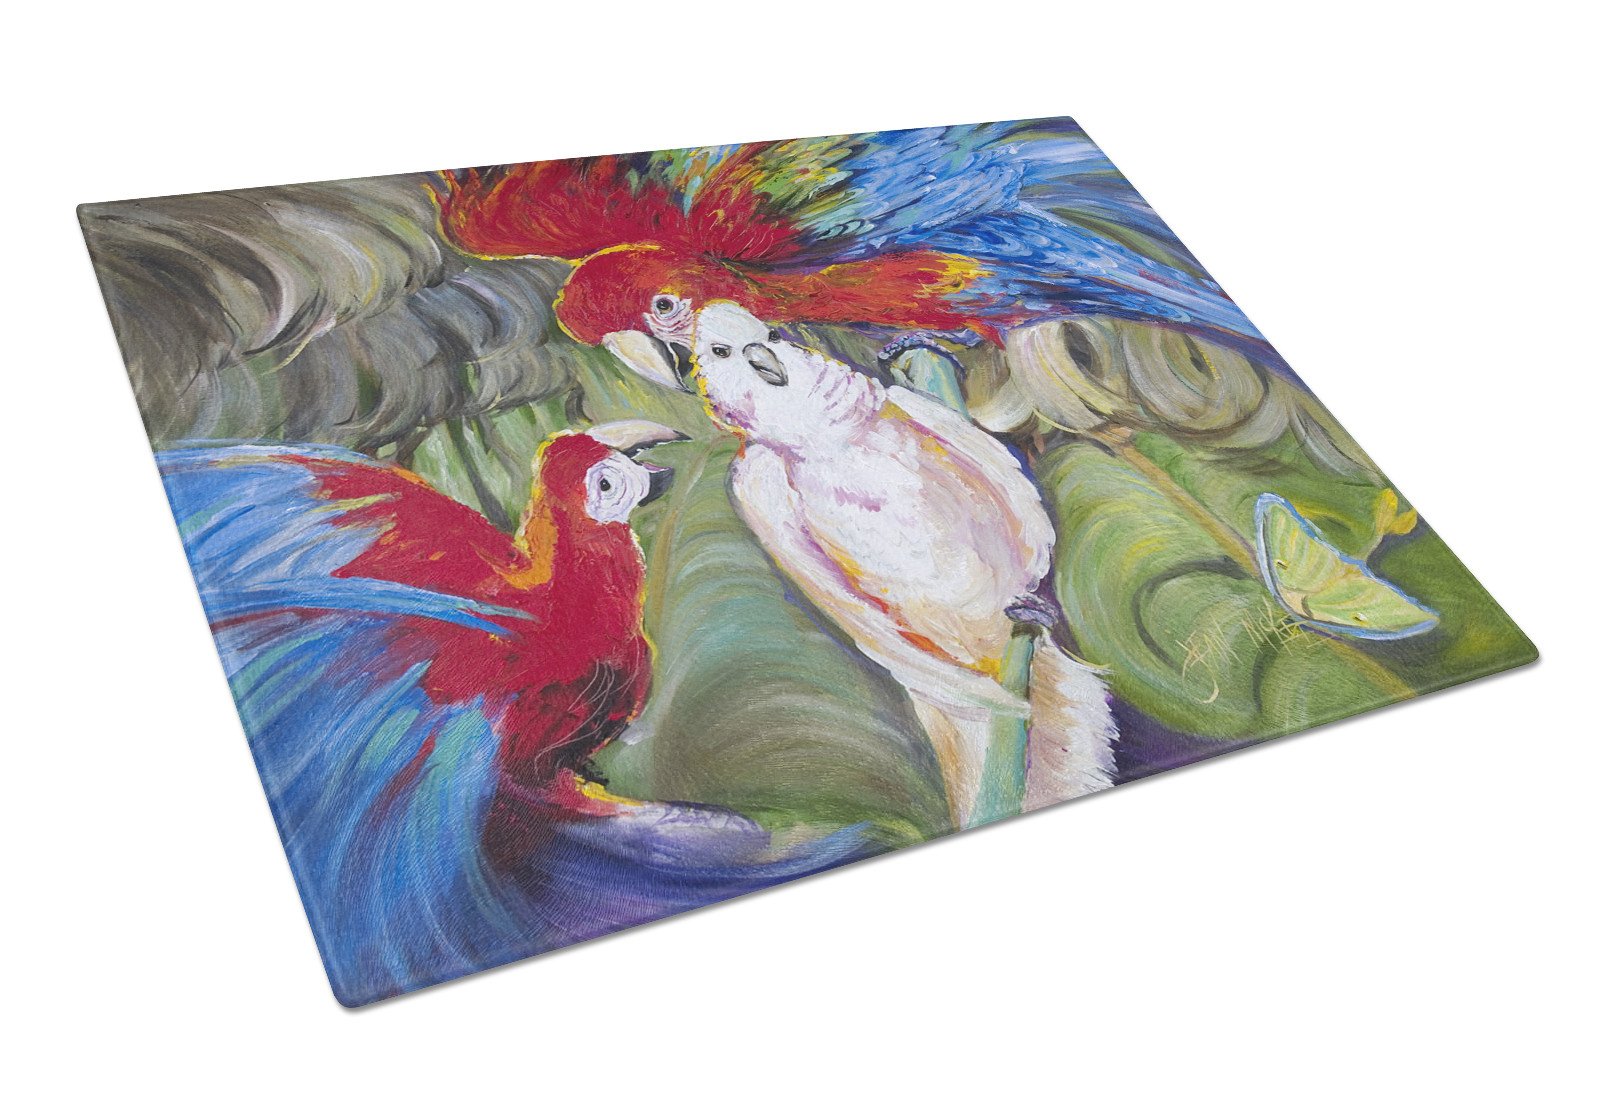 Menage-a-trois Parrots Glass Cutting Board Large JMK1018LCB by Caroline's Treasures